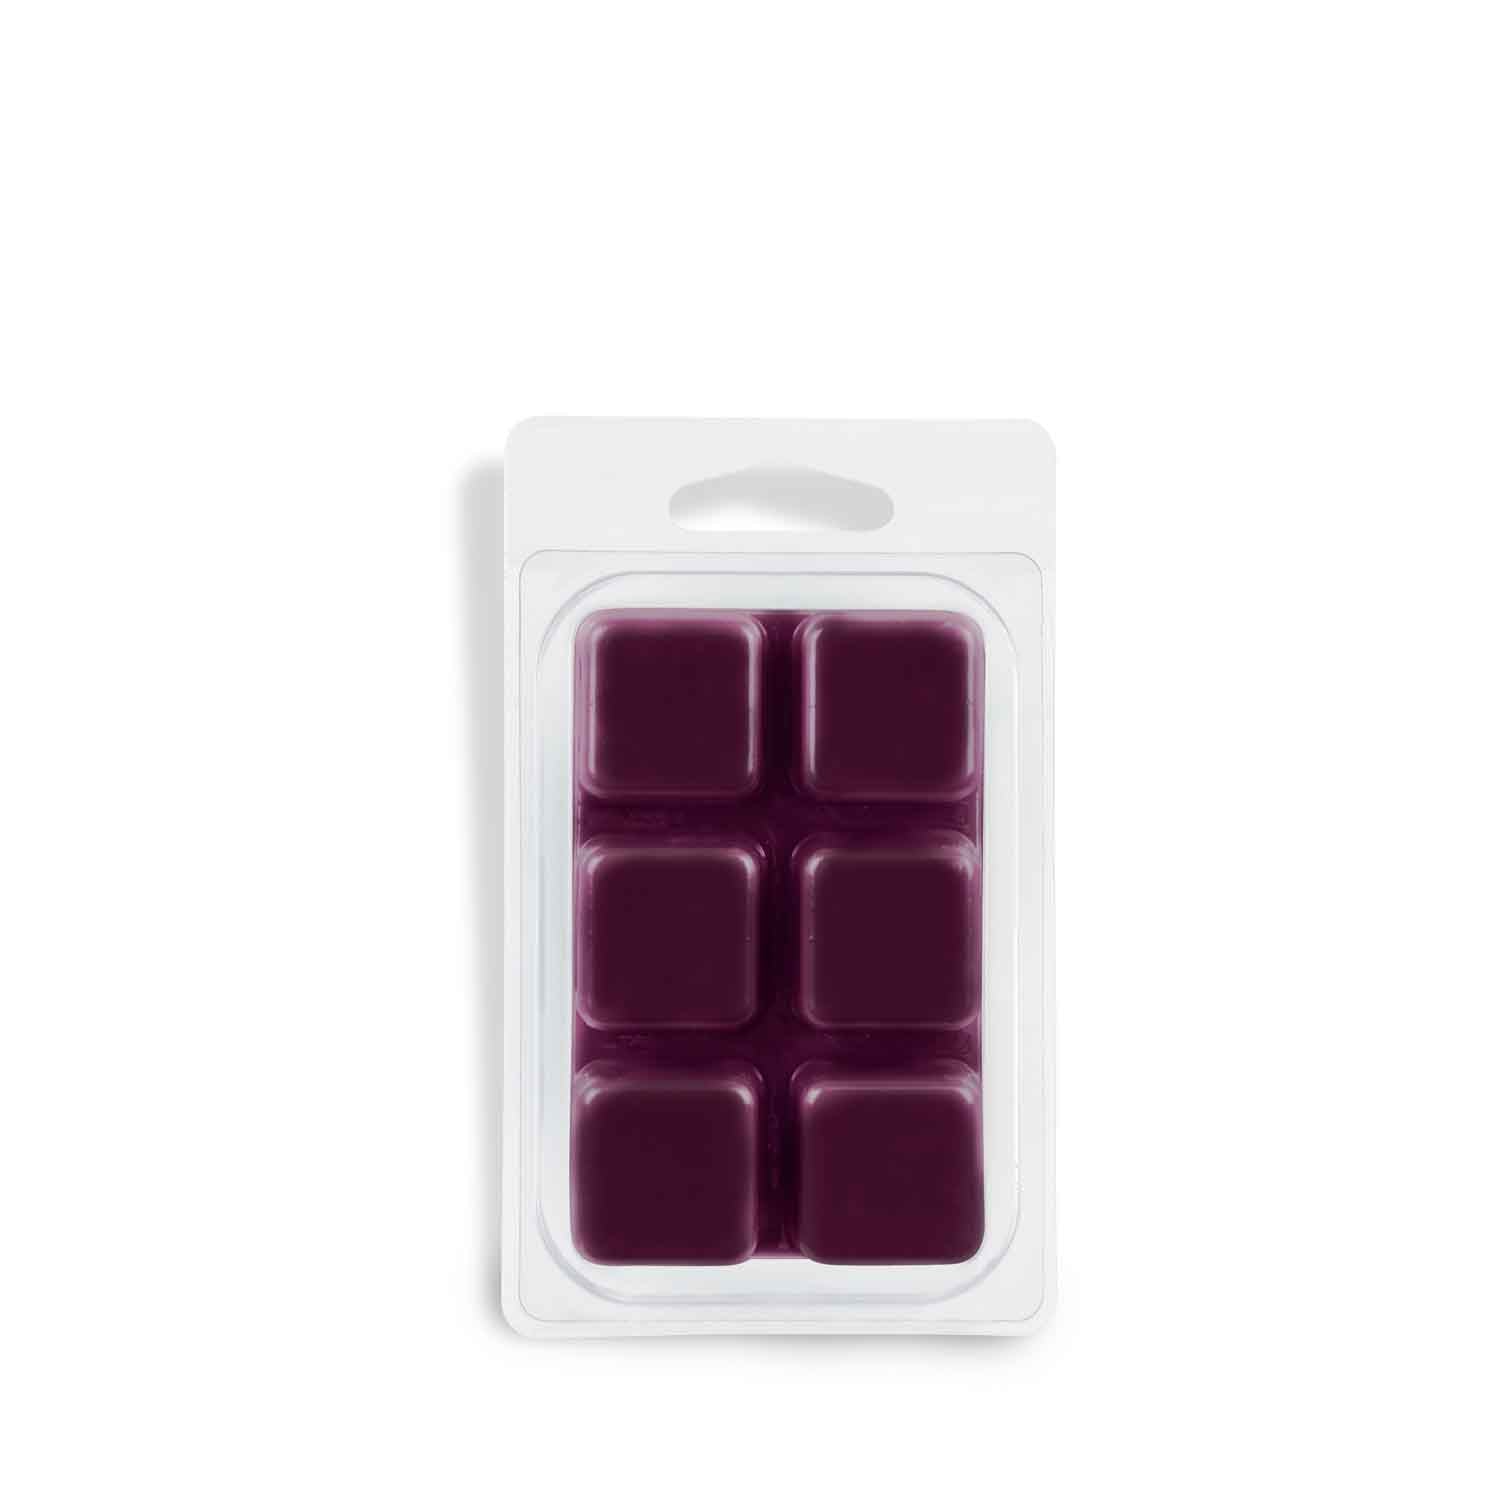 A pack of Black Cherry scented wax melts (2.5 oz) from Tuscany Candle for a fragrant experience.